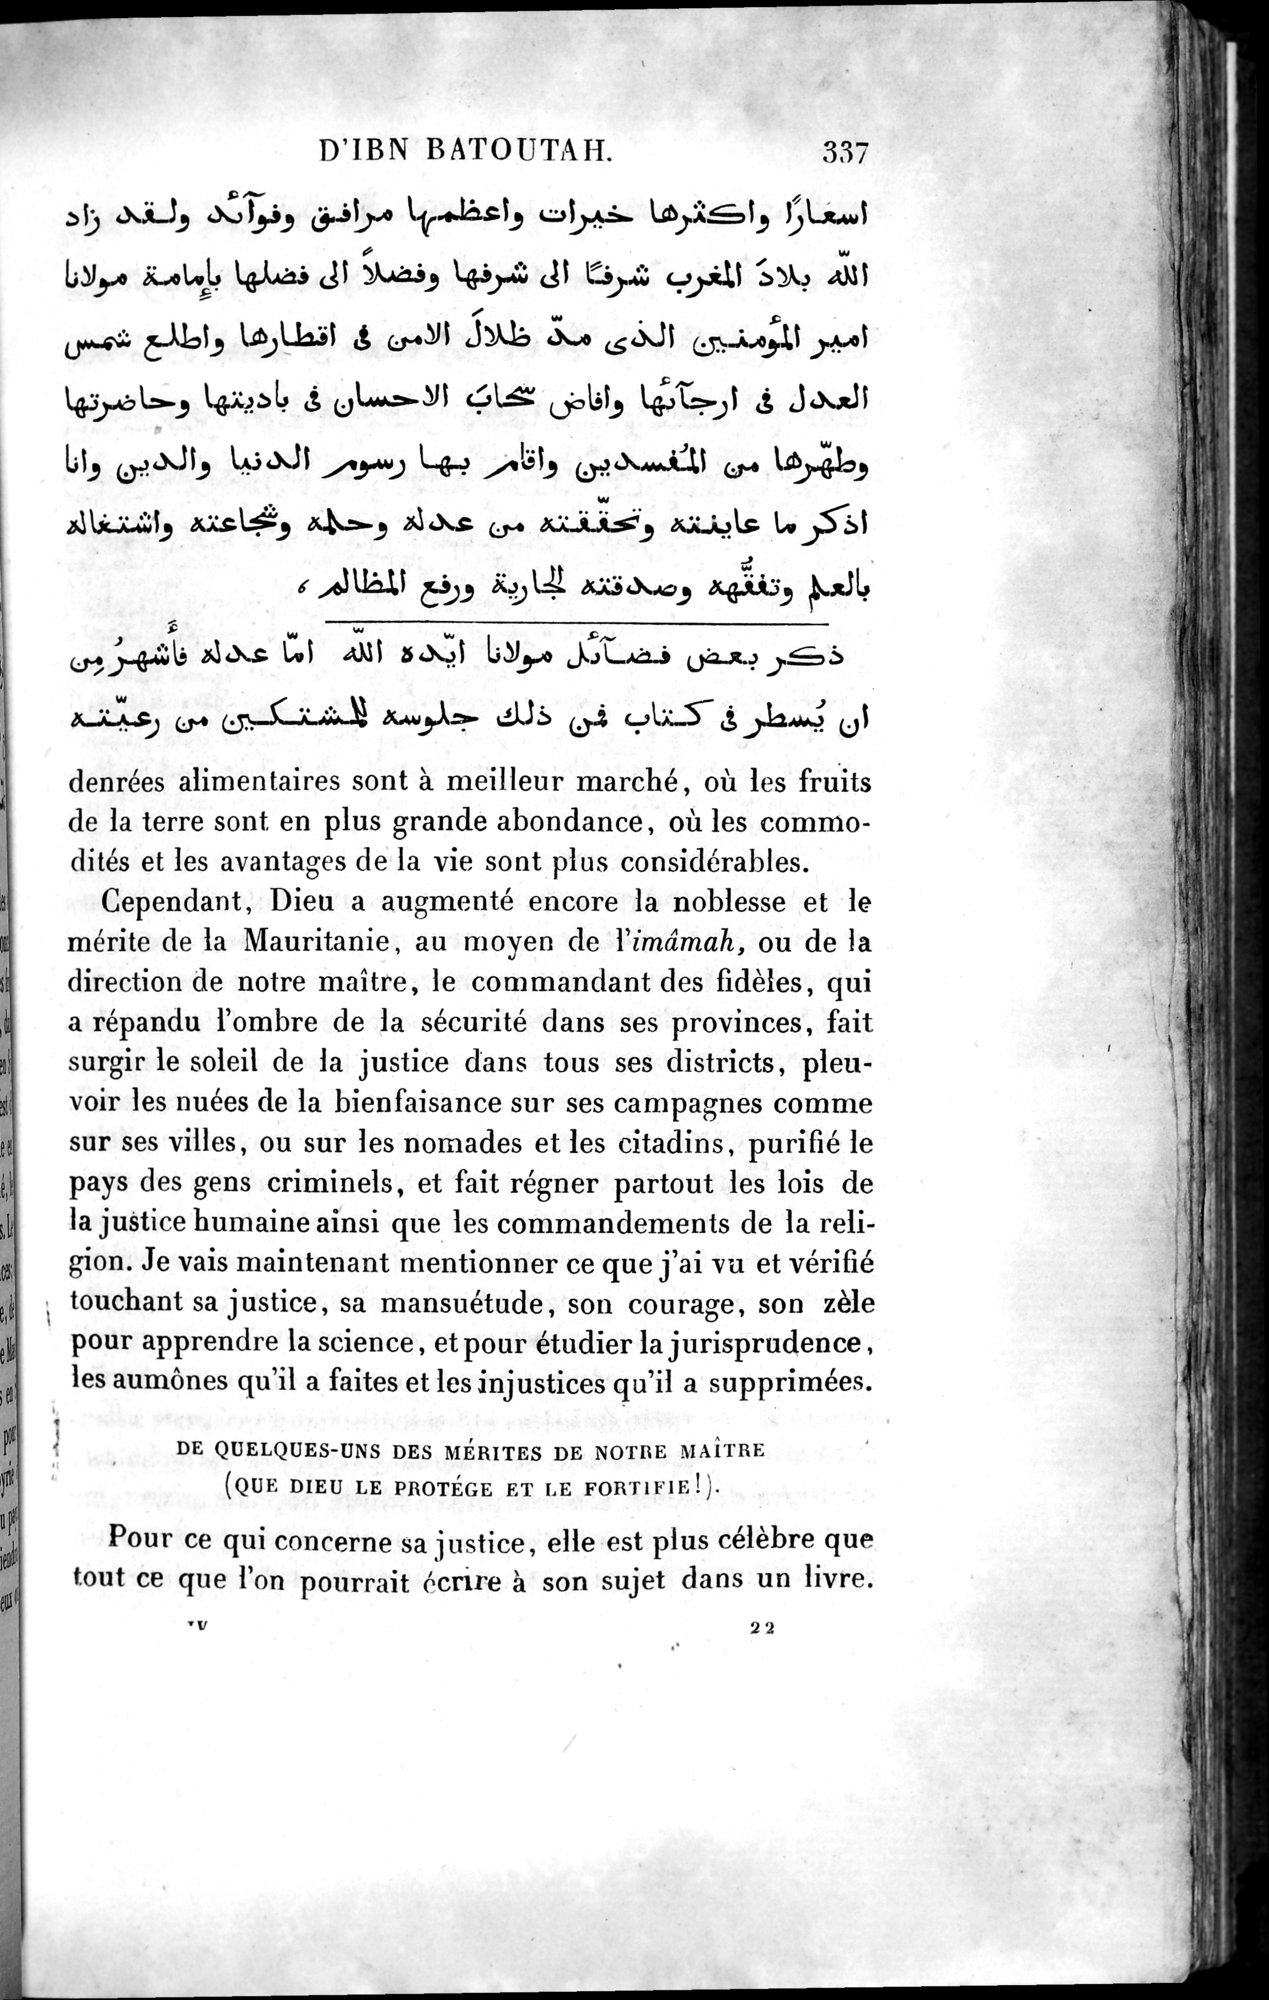 Voyages d'Ibn Batoutah : vol.4 / Page 349 (Grayscale High Resolution Image)